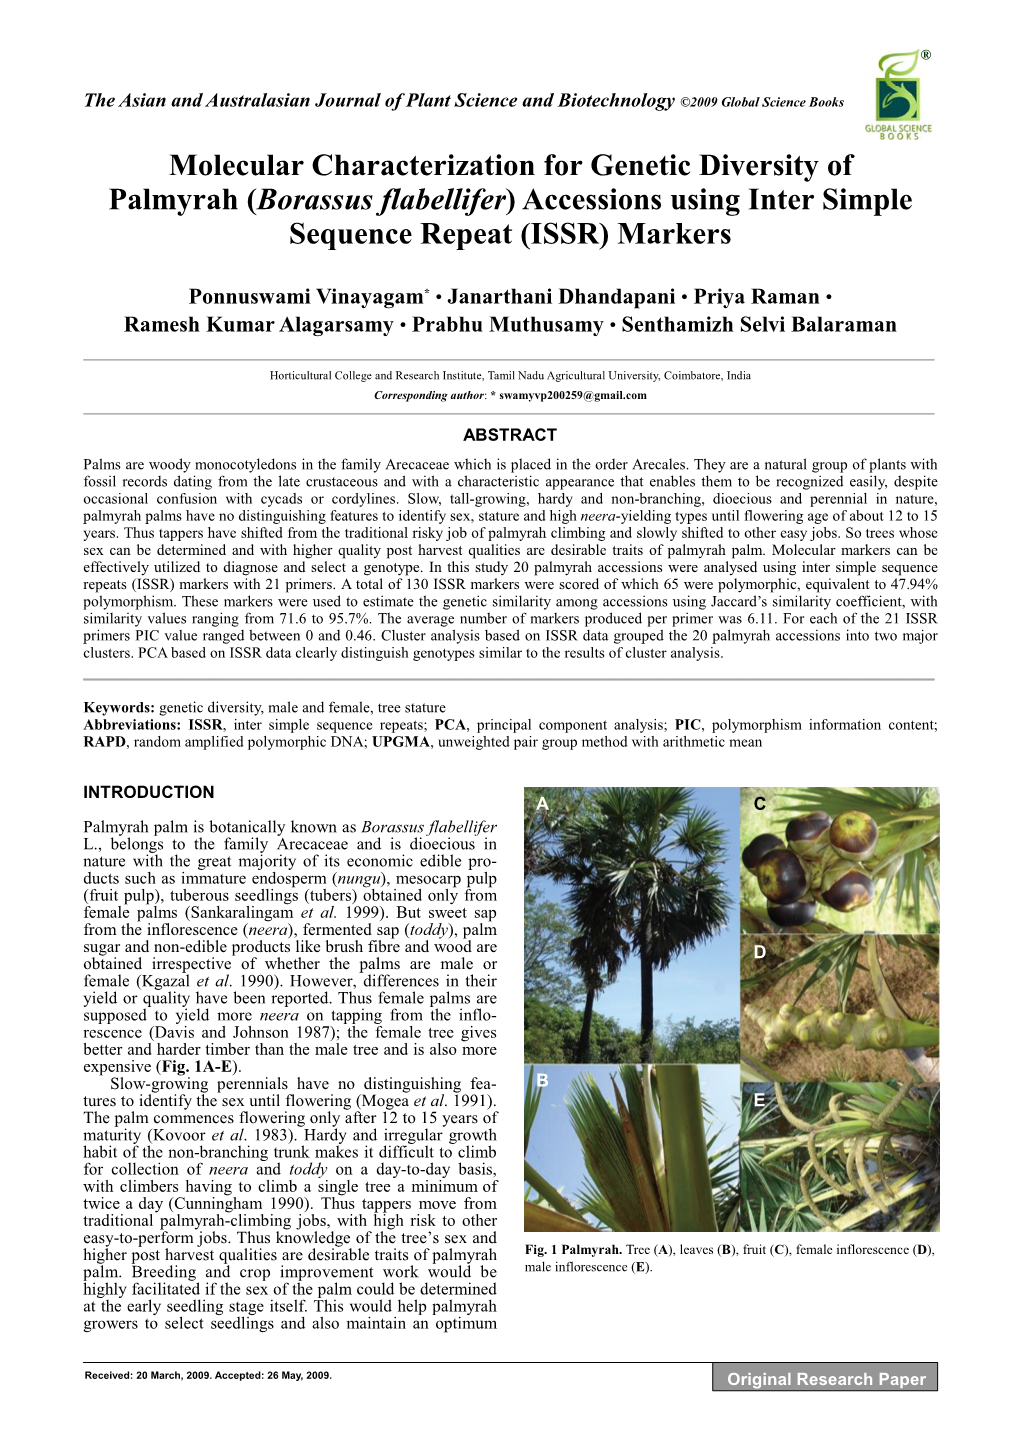 Borassus Flabellifer) Accessions Using Inter Simple Sequence Repeat (ISSR) Markers